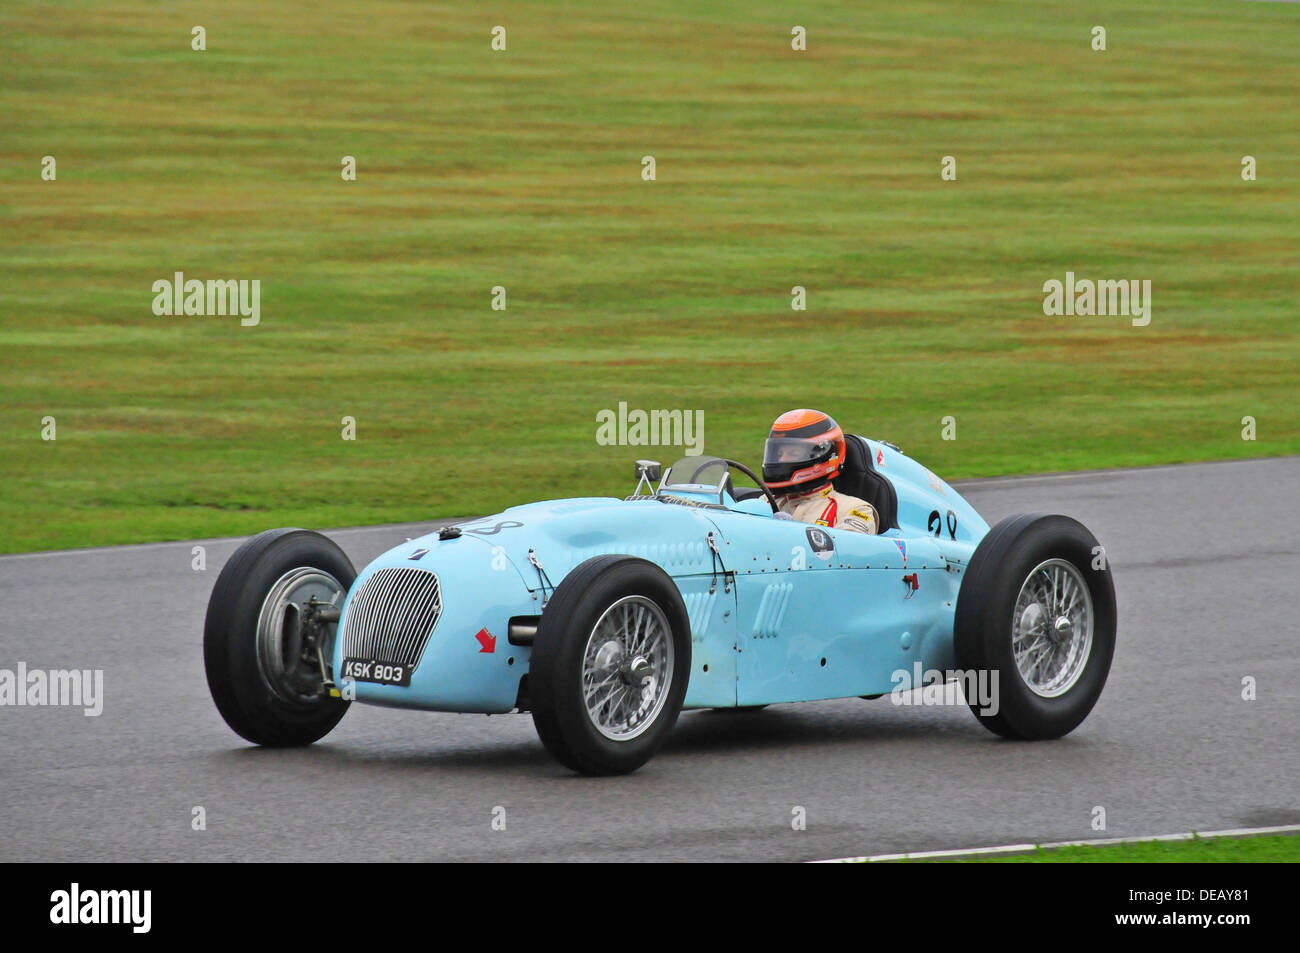 Talbot Lago Monoplace Decalee Goodwood Revival 2013 Stockfoto